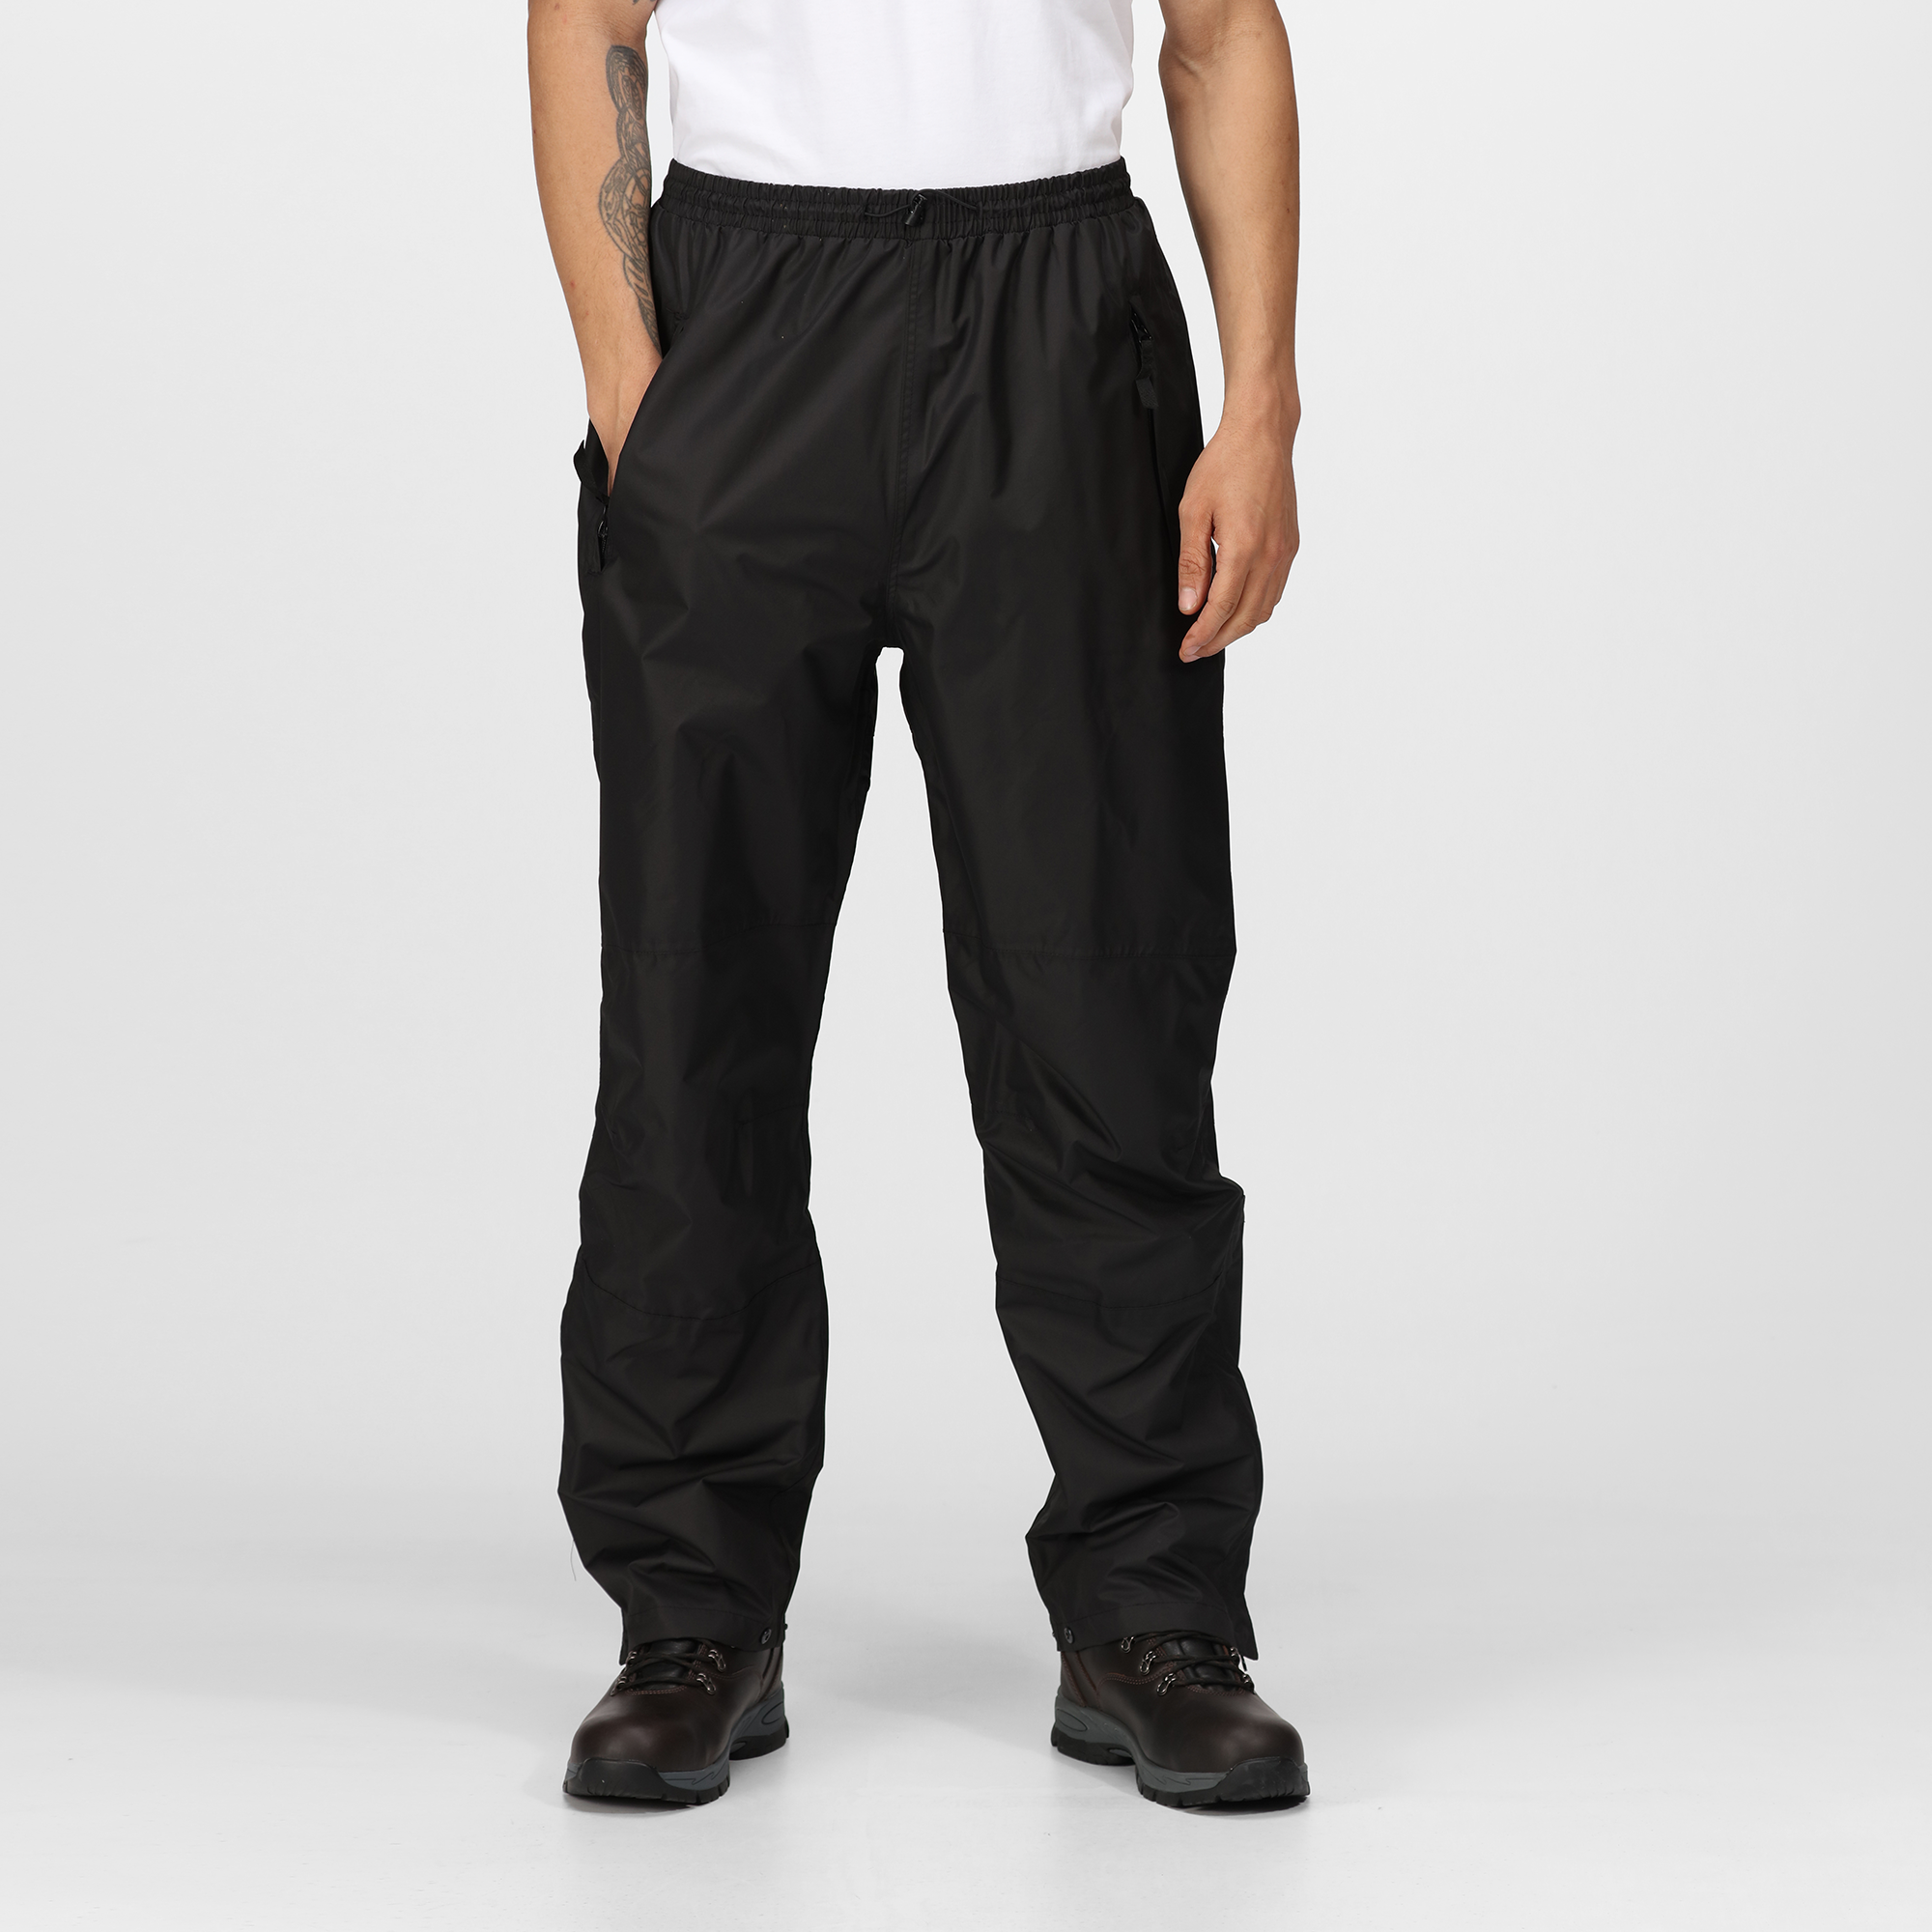 LINTON BREATHABLE LINED OVERTROUSERS - Regatta Professional